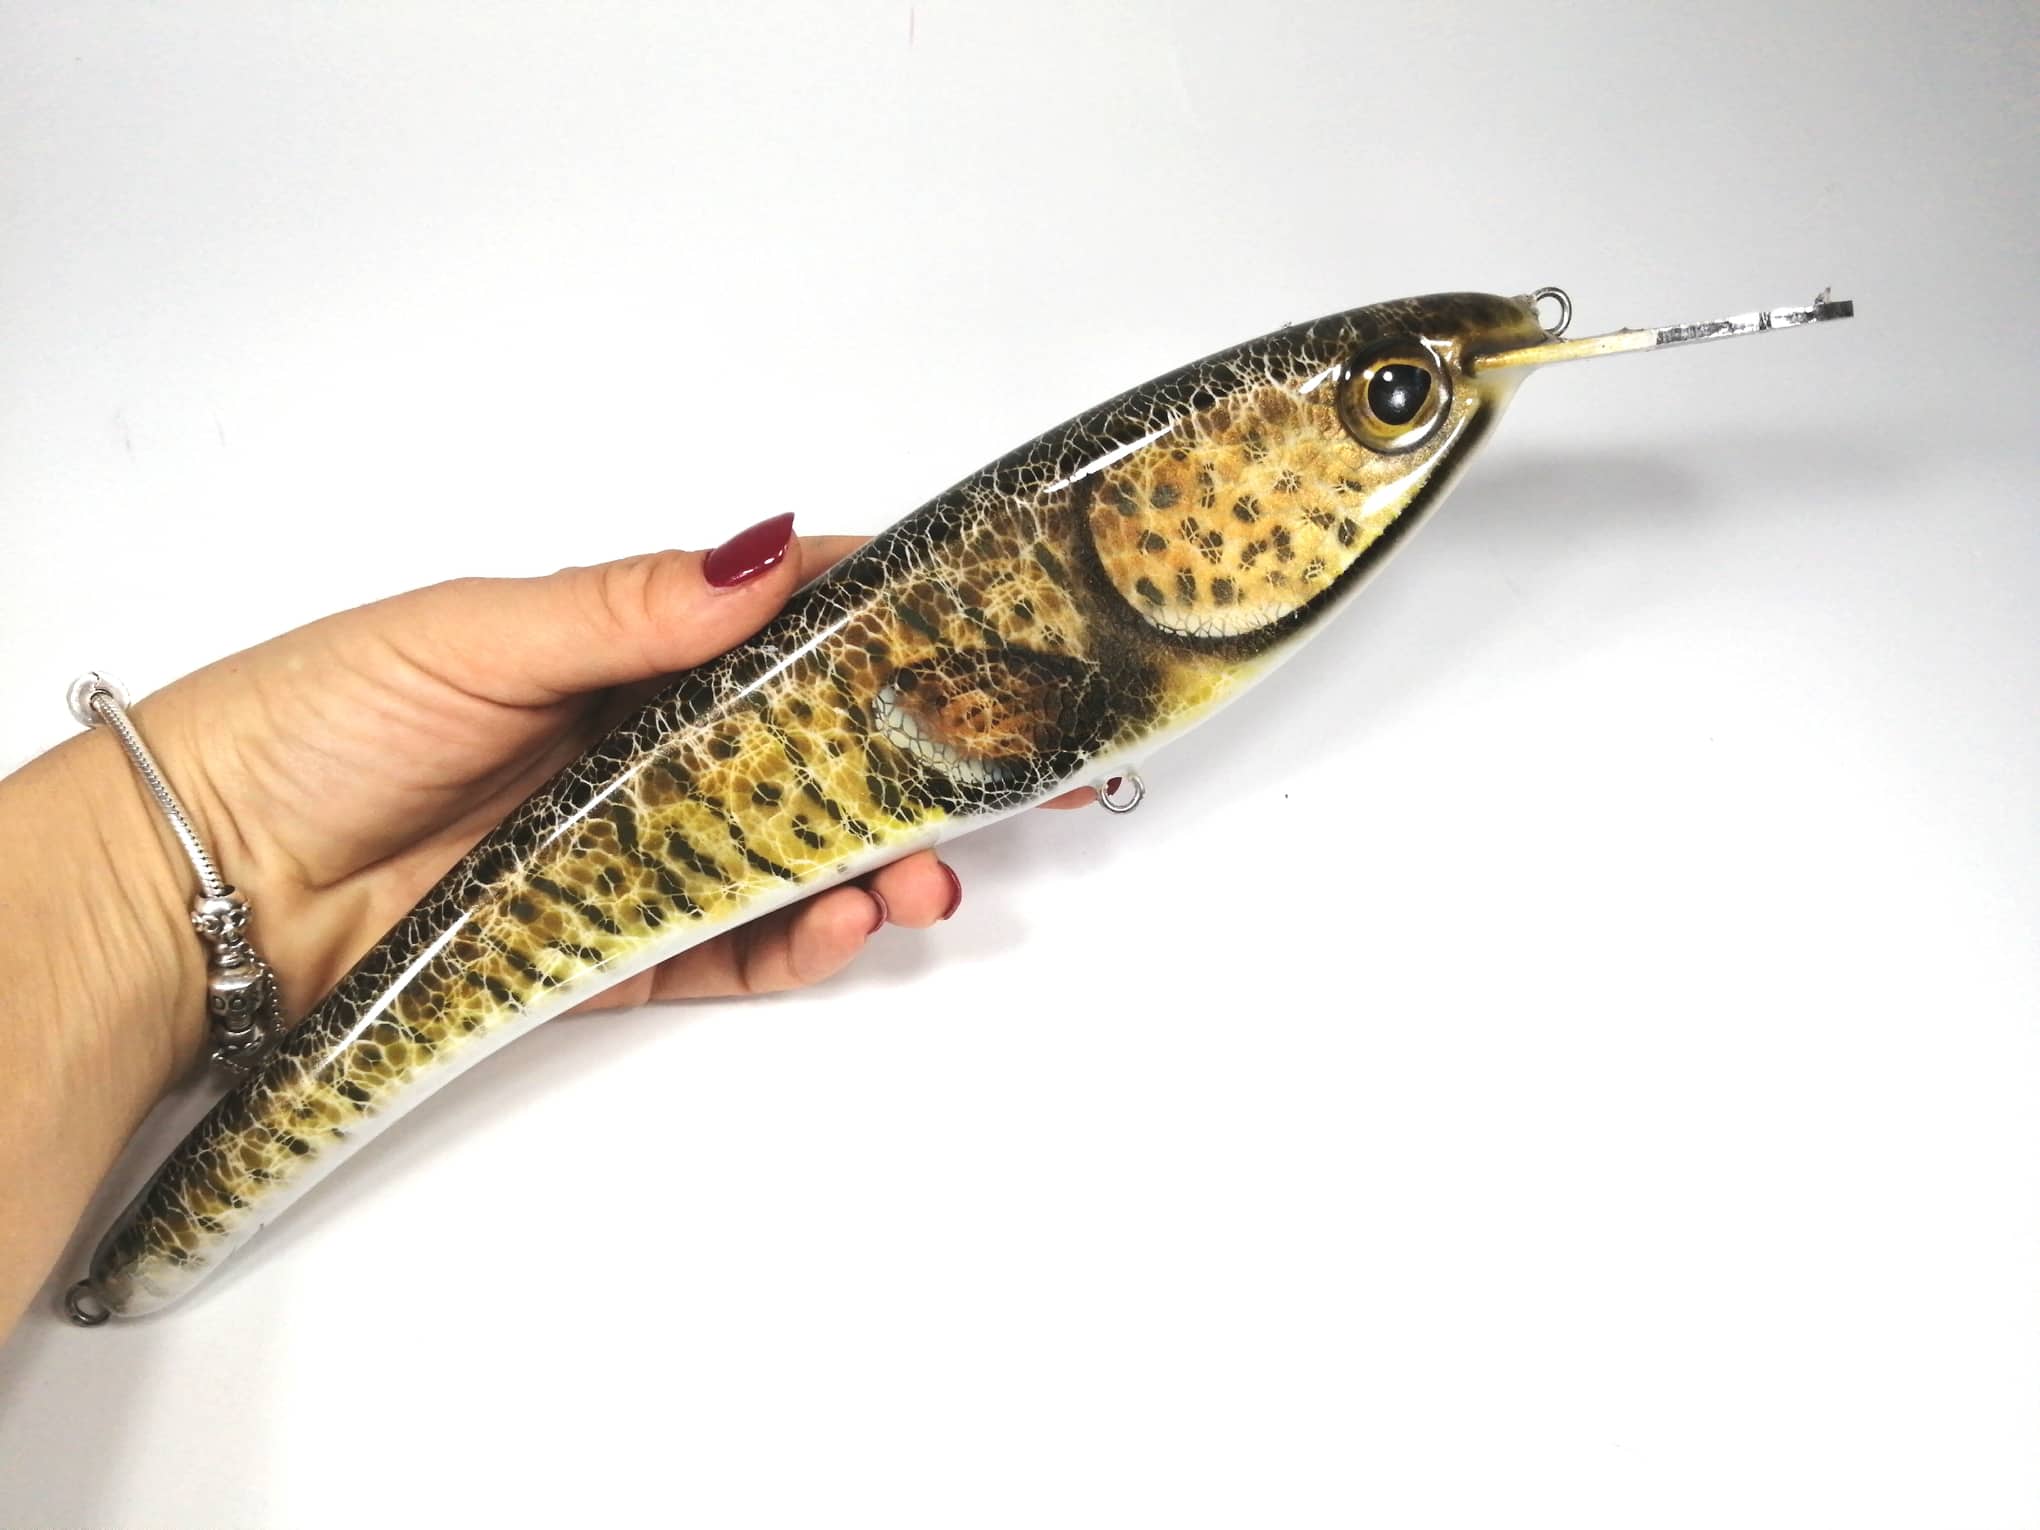 Electra L Musky - Handmade Custom Lures for Freshwater Fishing